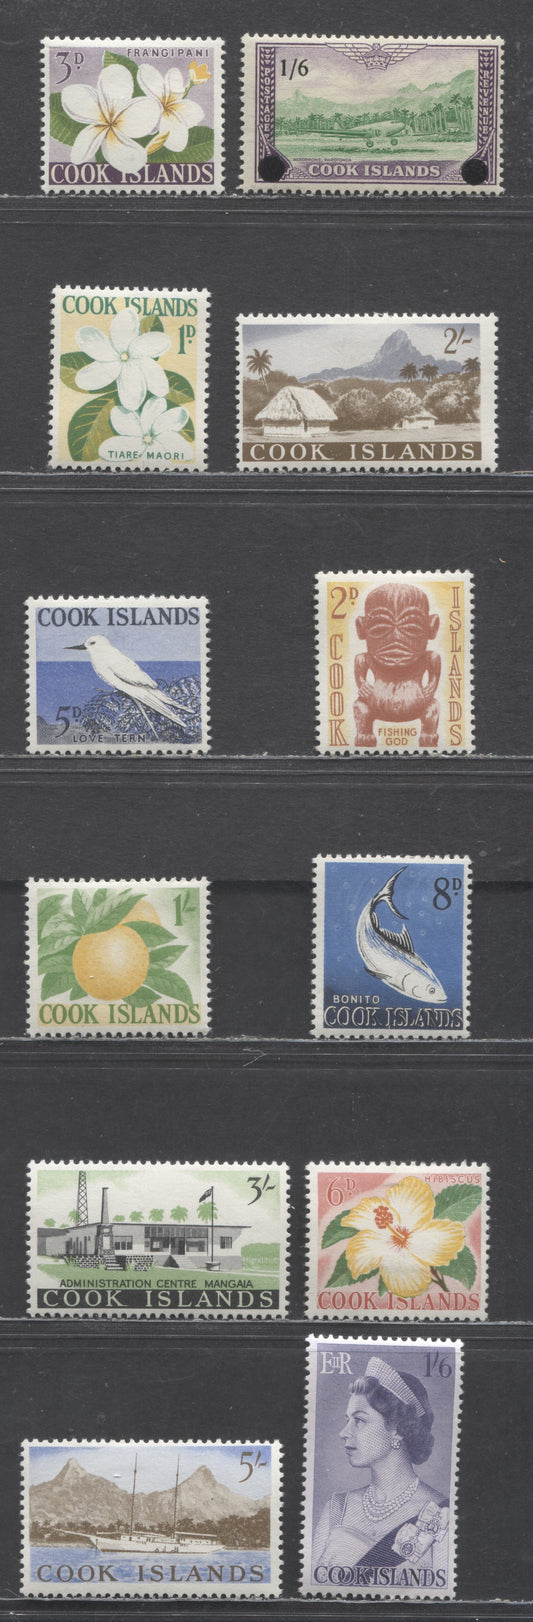 Lot 91 Cook Islands SC#147-158 1963 Pictorial Definitives & Surcharges, 12 F/VFOG Singles, Click on Listing to See ALL Pictures, 2017 Scott Cat. $10